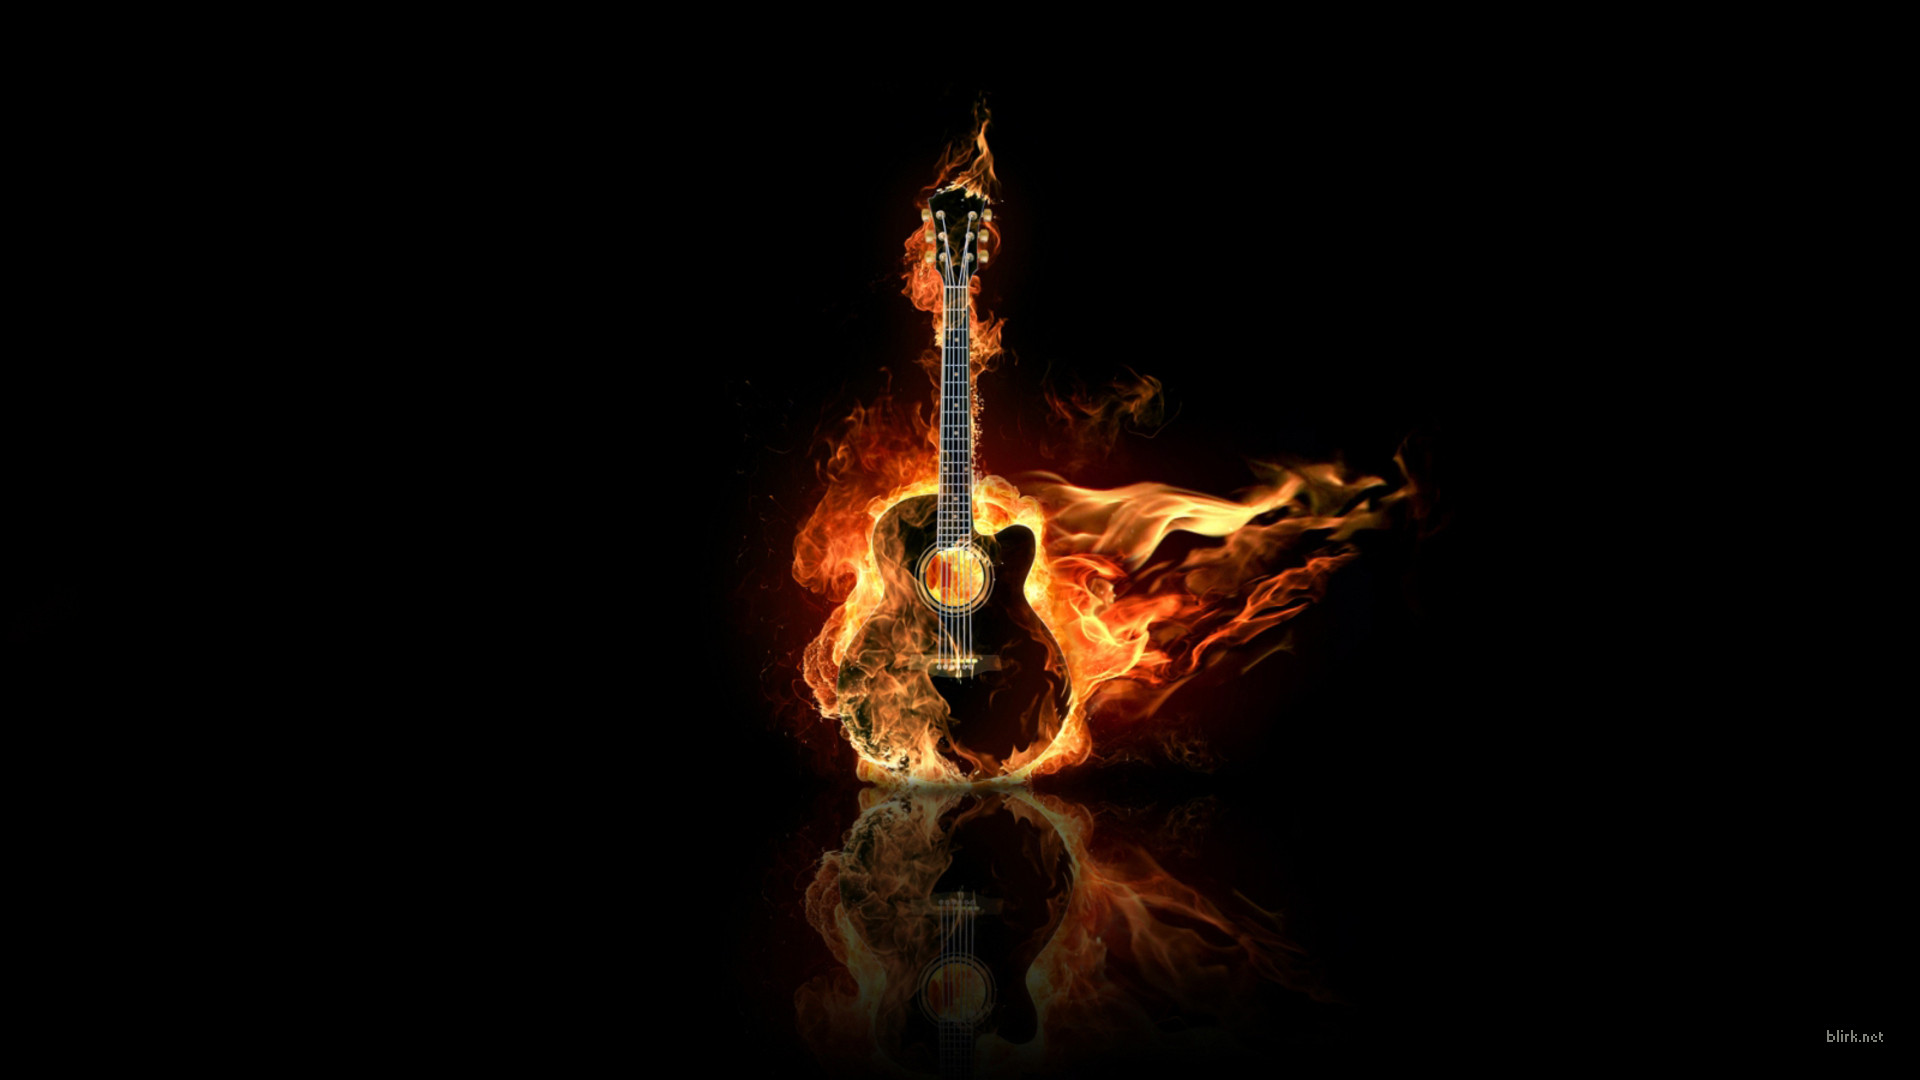 Guitar neck and string Wallpaper hd background - Fresh HD